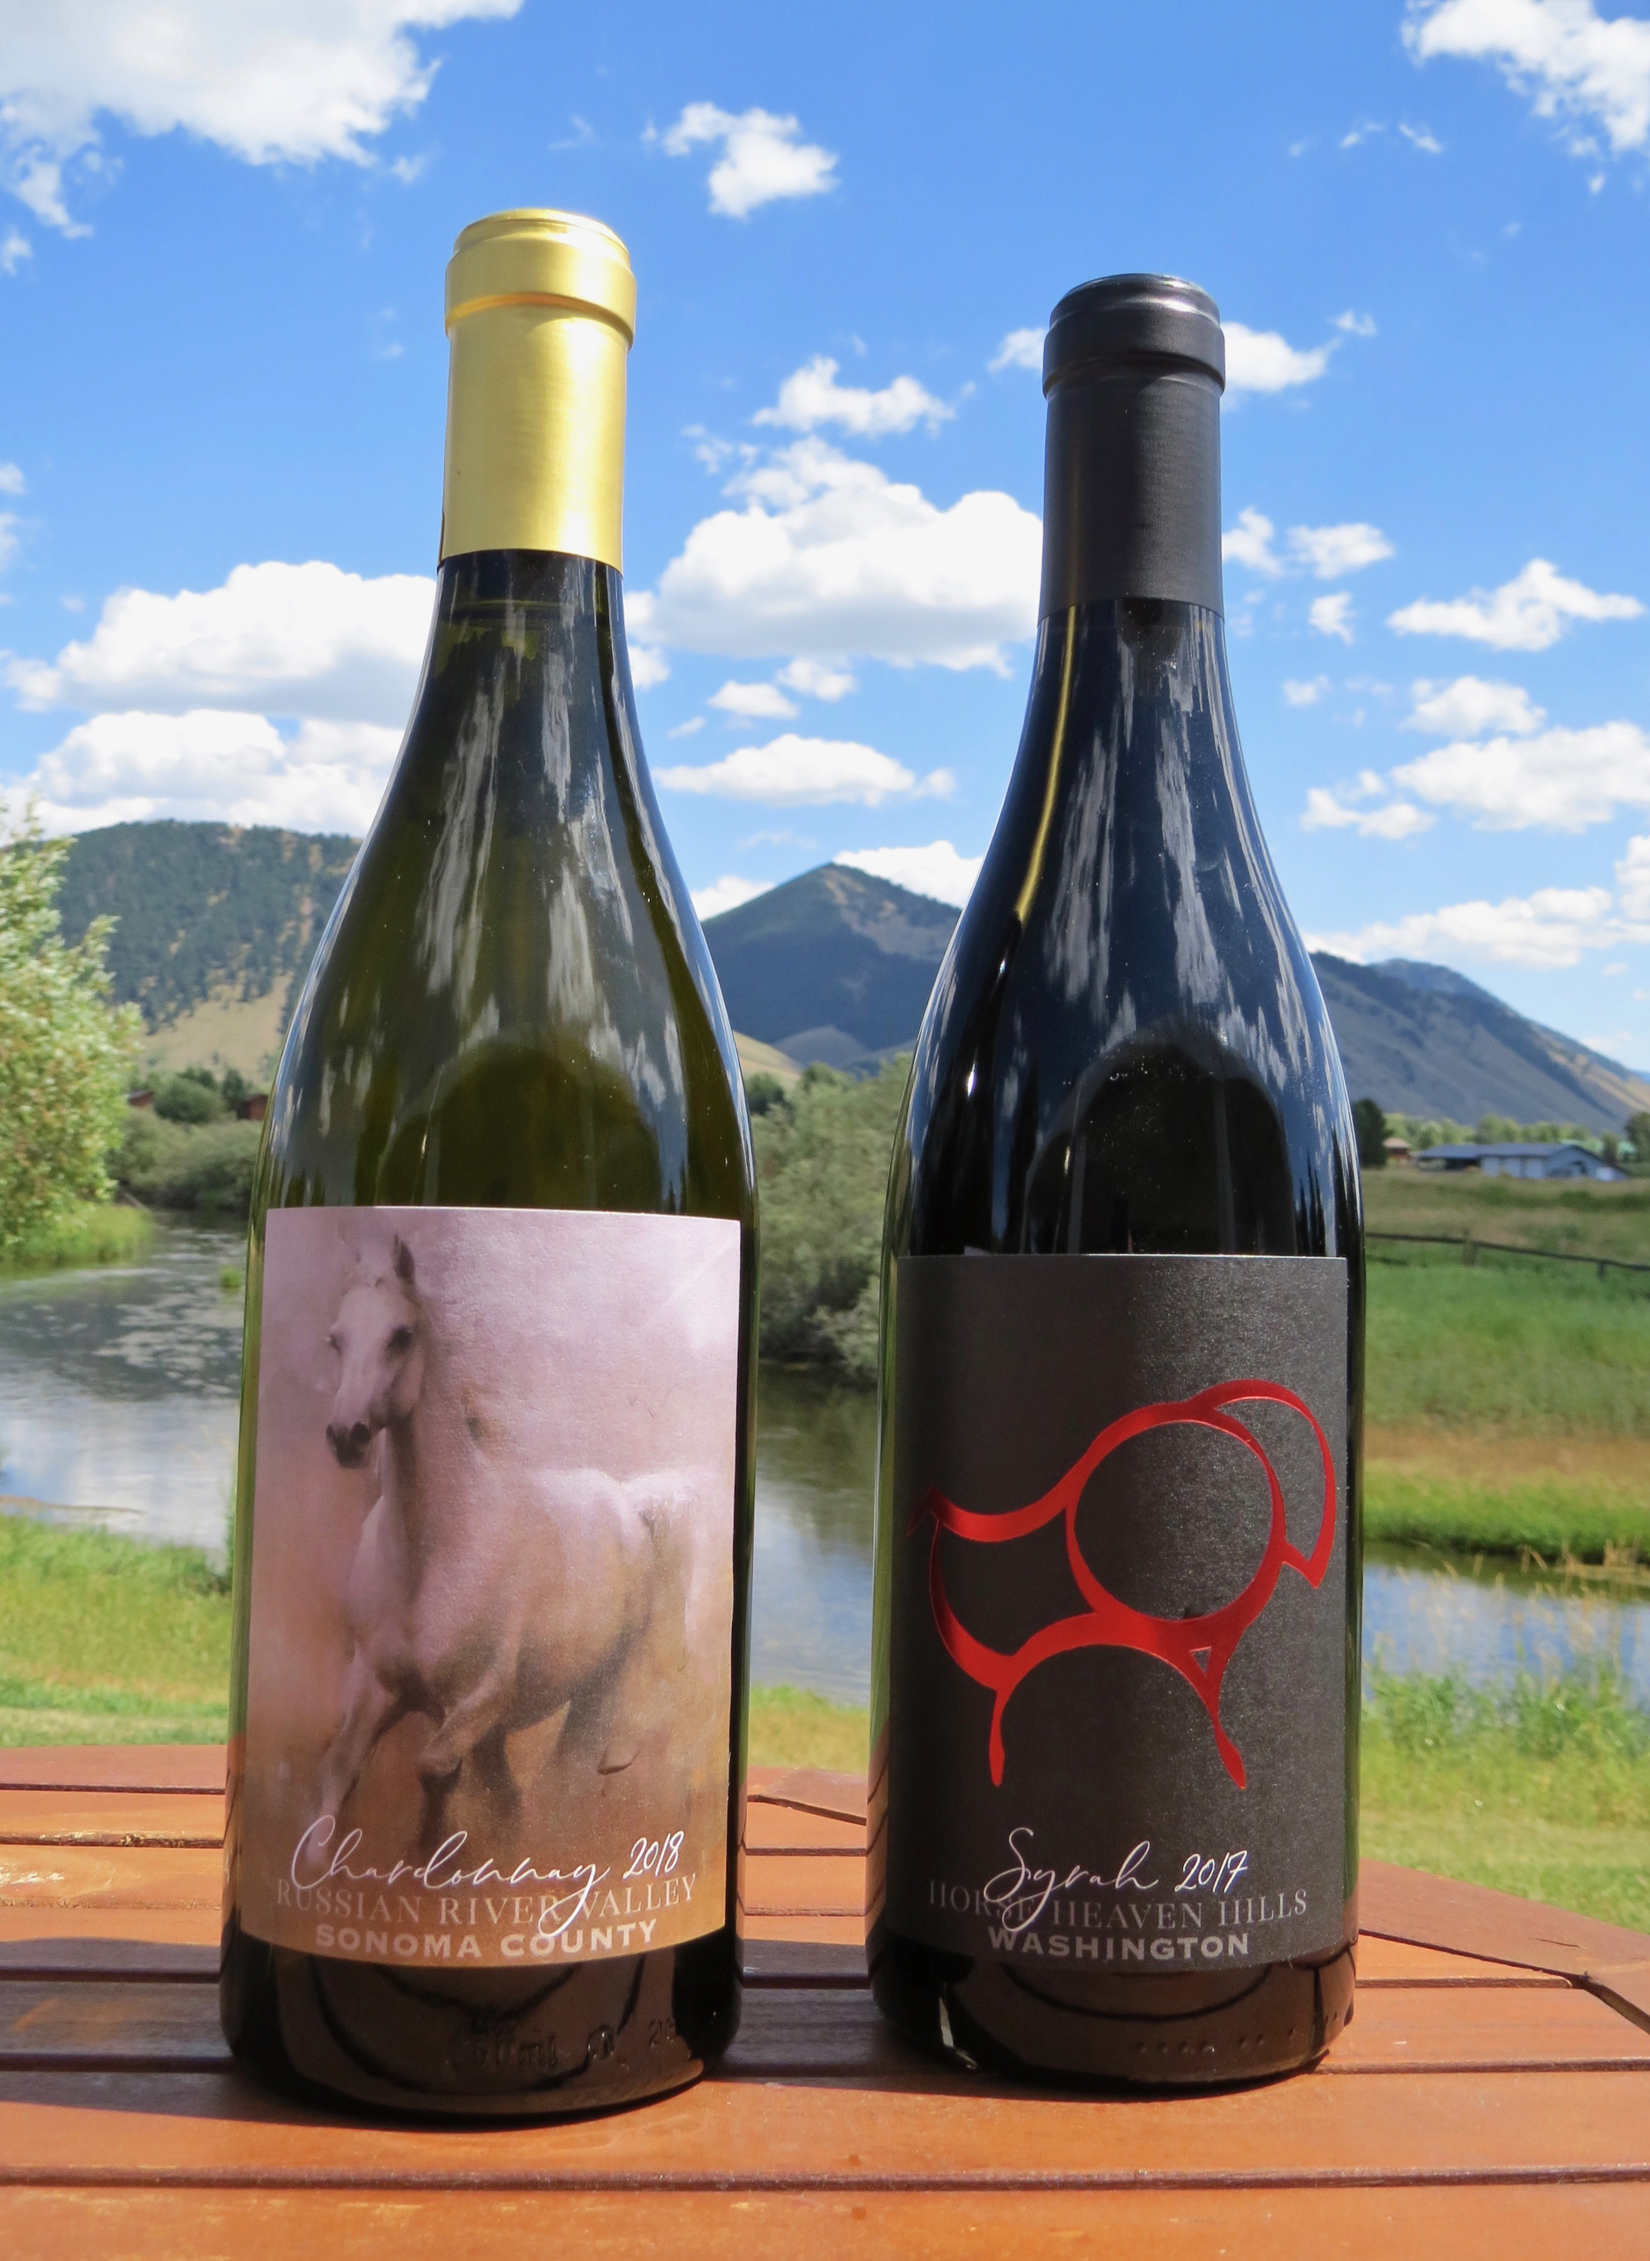 Fall Arts Festival wines from Jackson Hole Winery displaying the event’s 2019 featured artwork will be available throughout the festival for purchase.